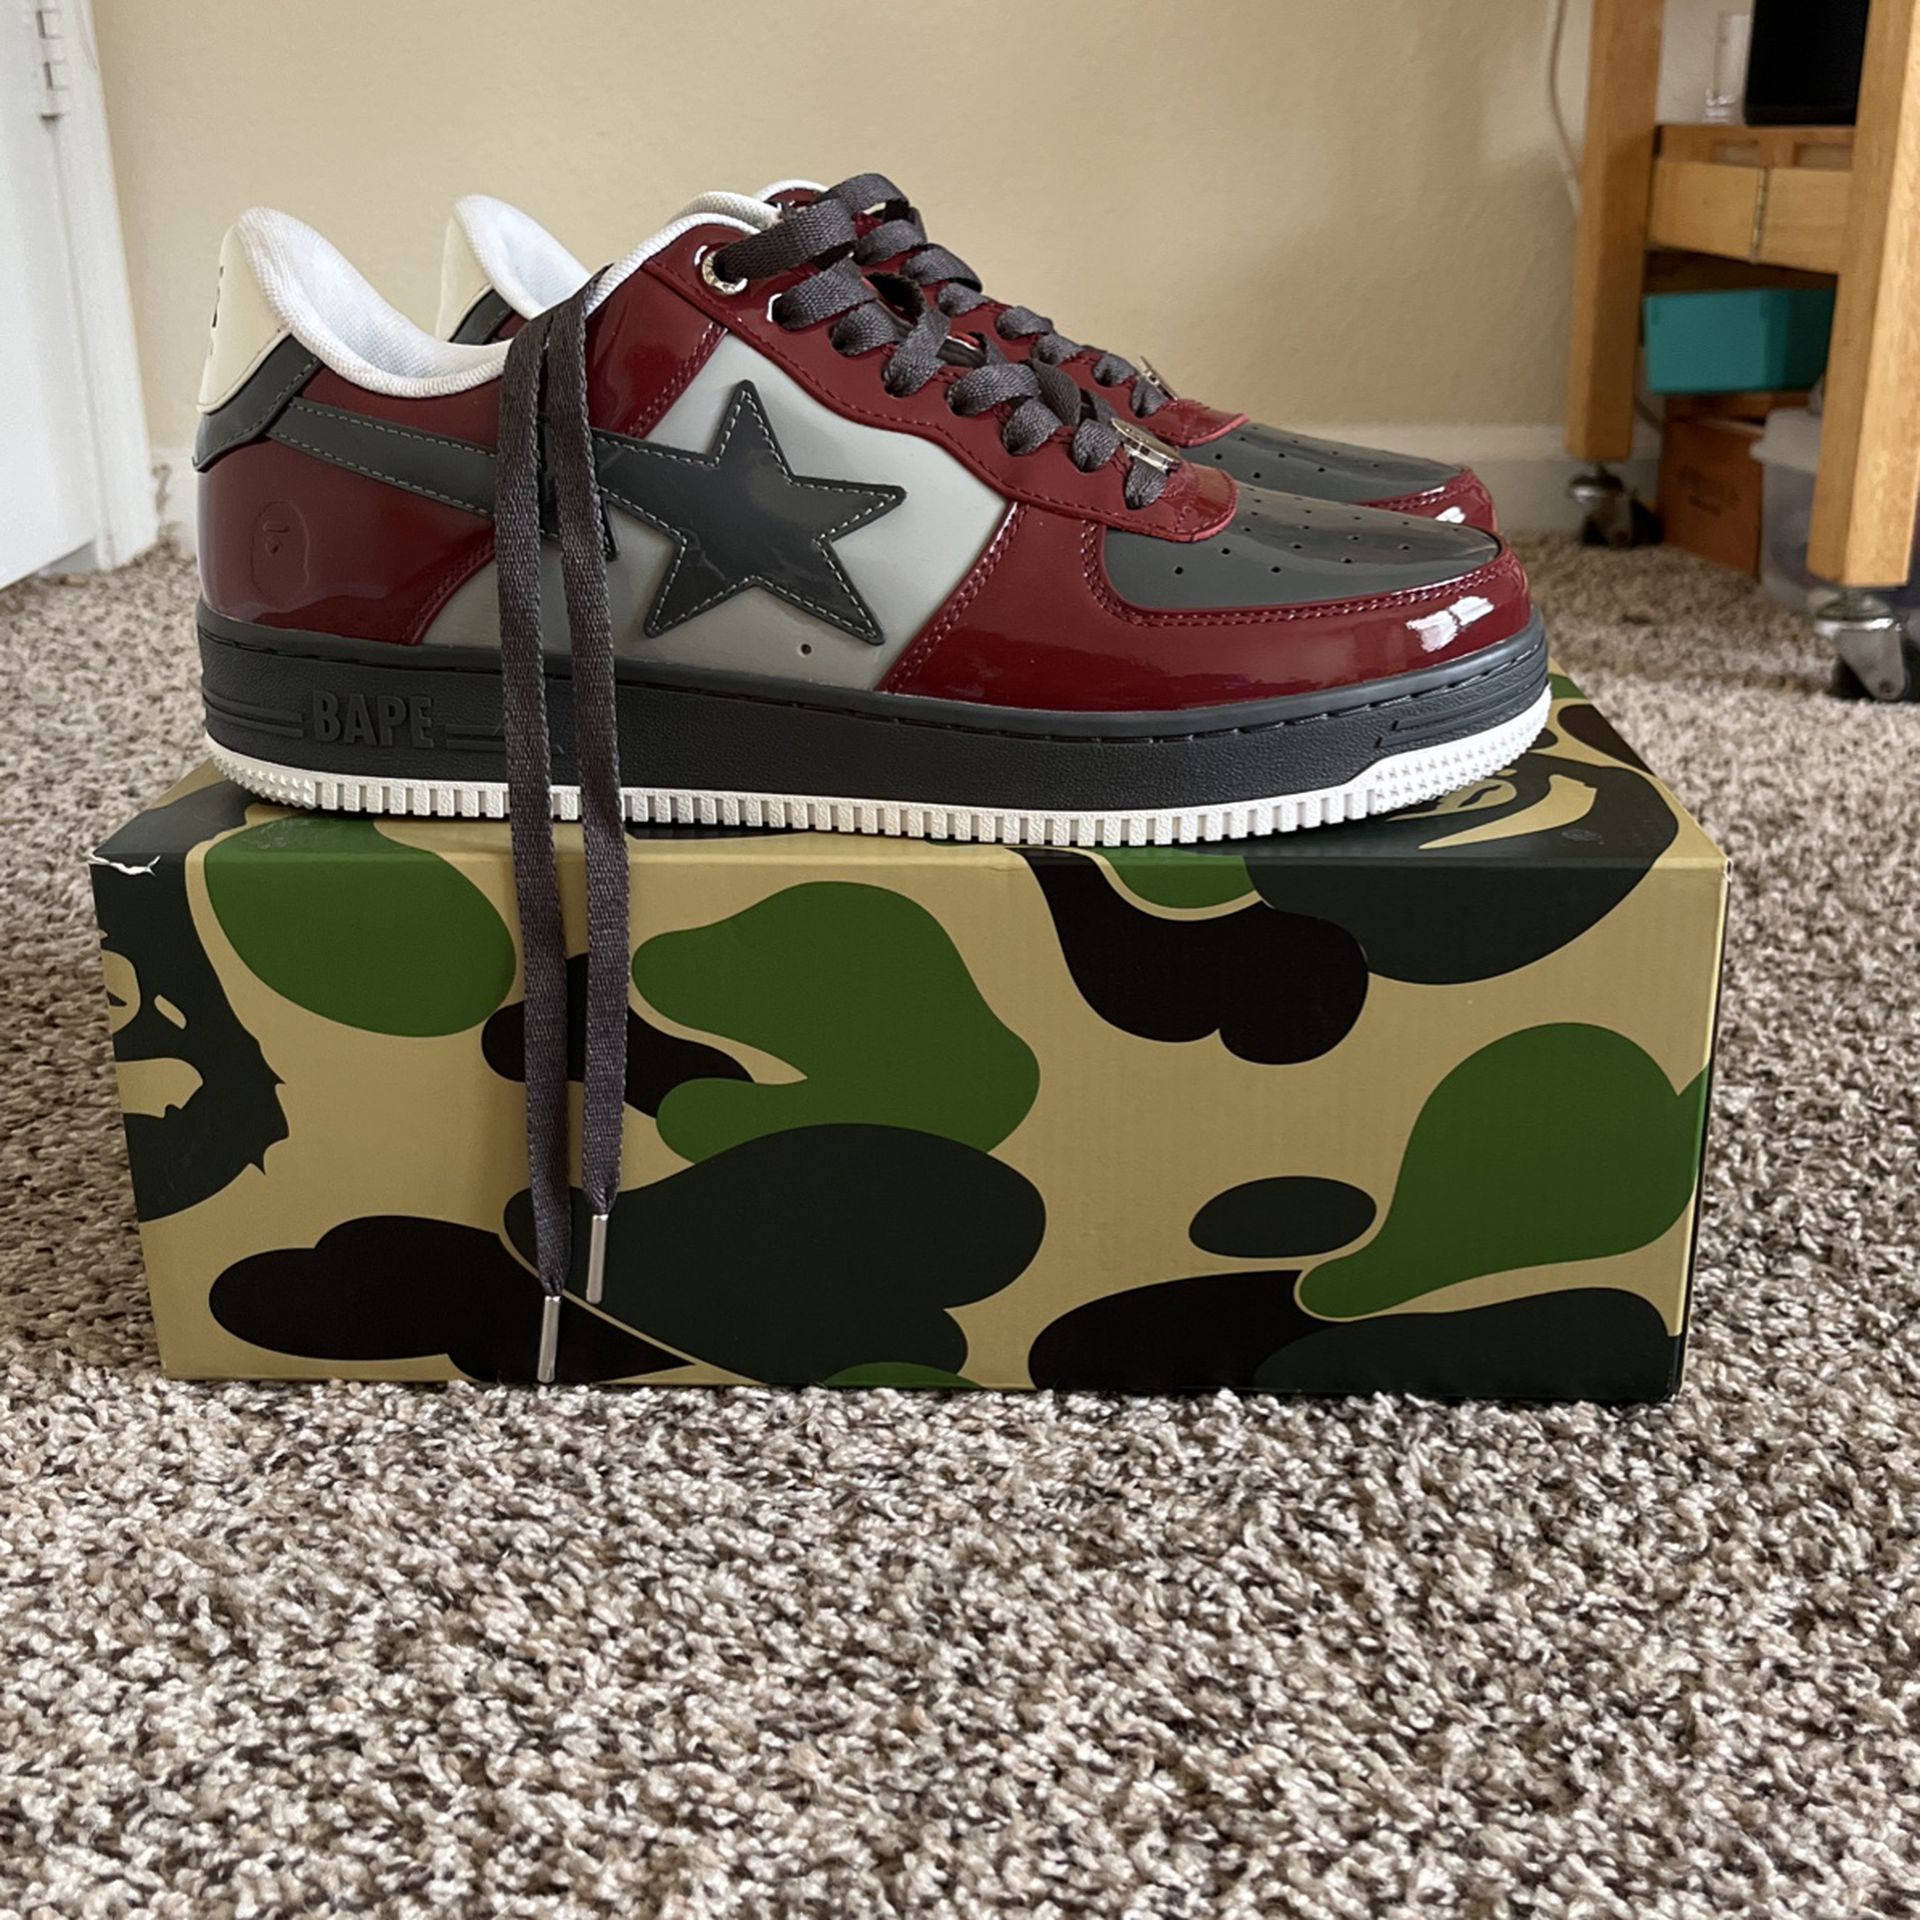 Bape Sta Shoes for Sale in Chesapeake, VA - OfferUp